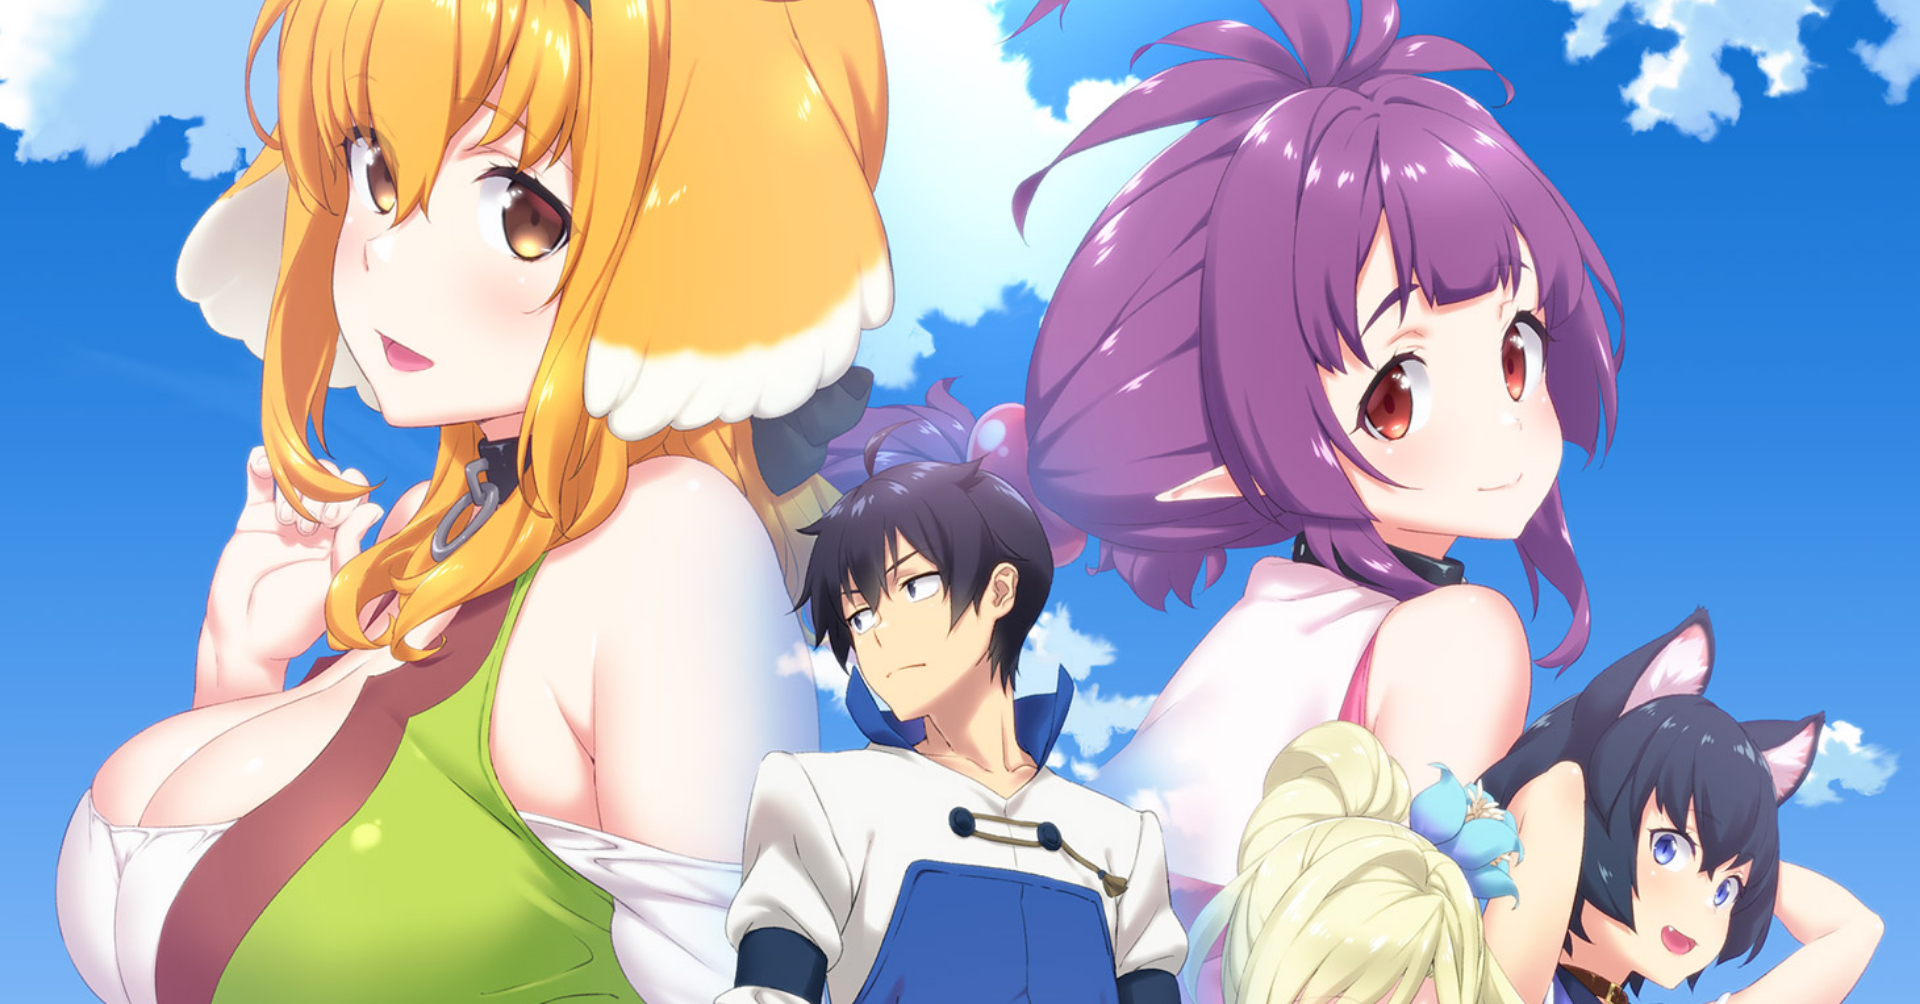 Summer 2022 First Impressions – Harem in the Labyrinth of Another